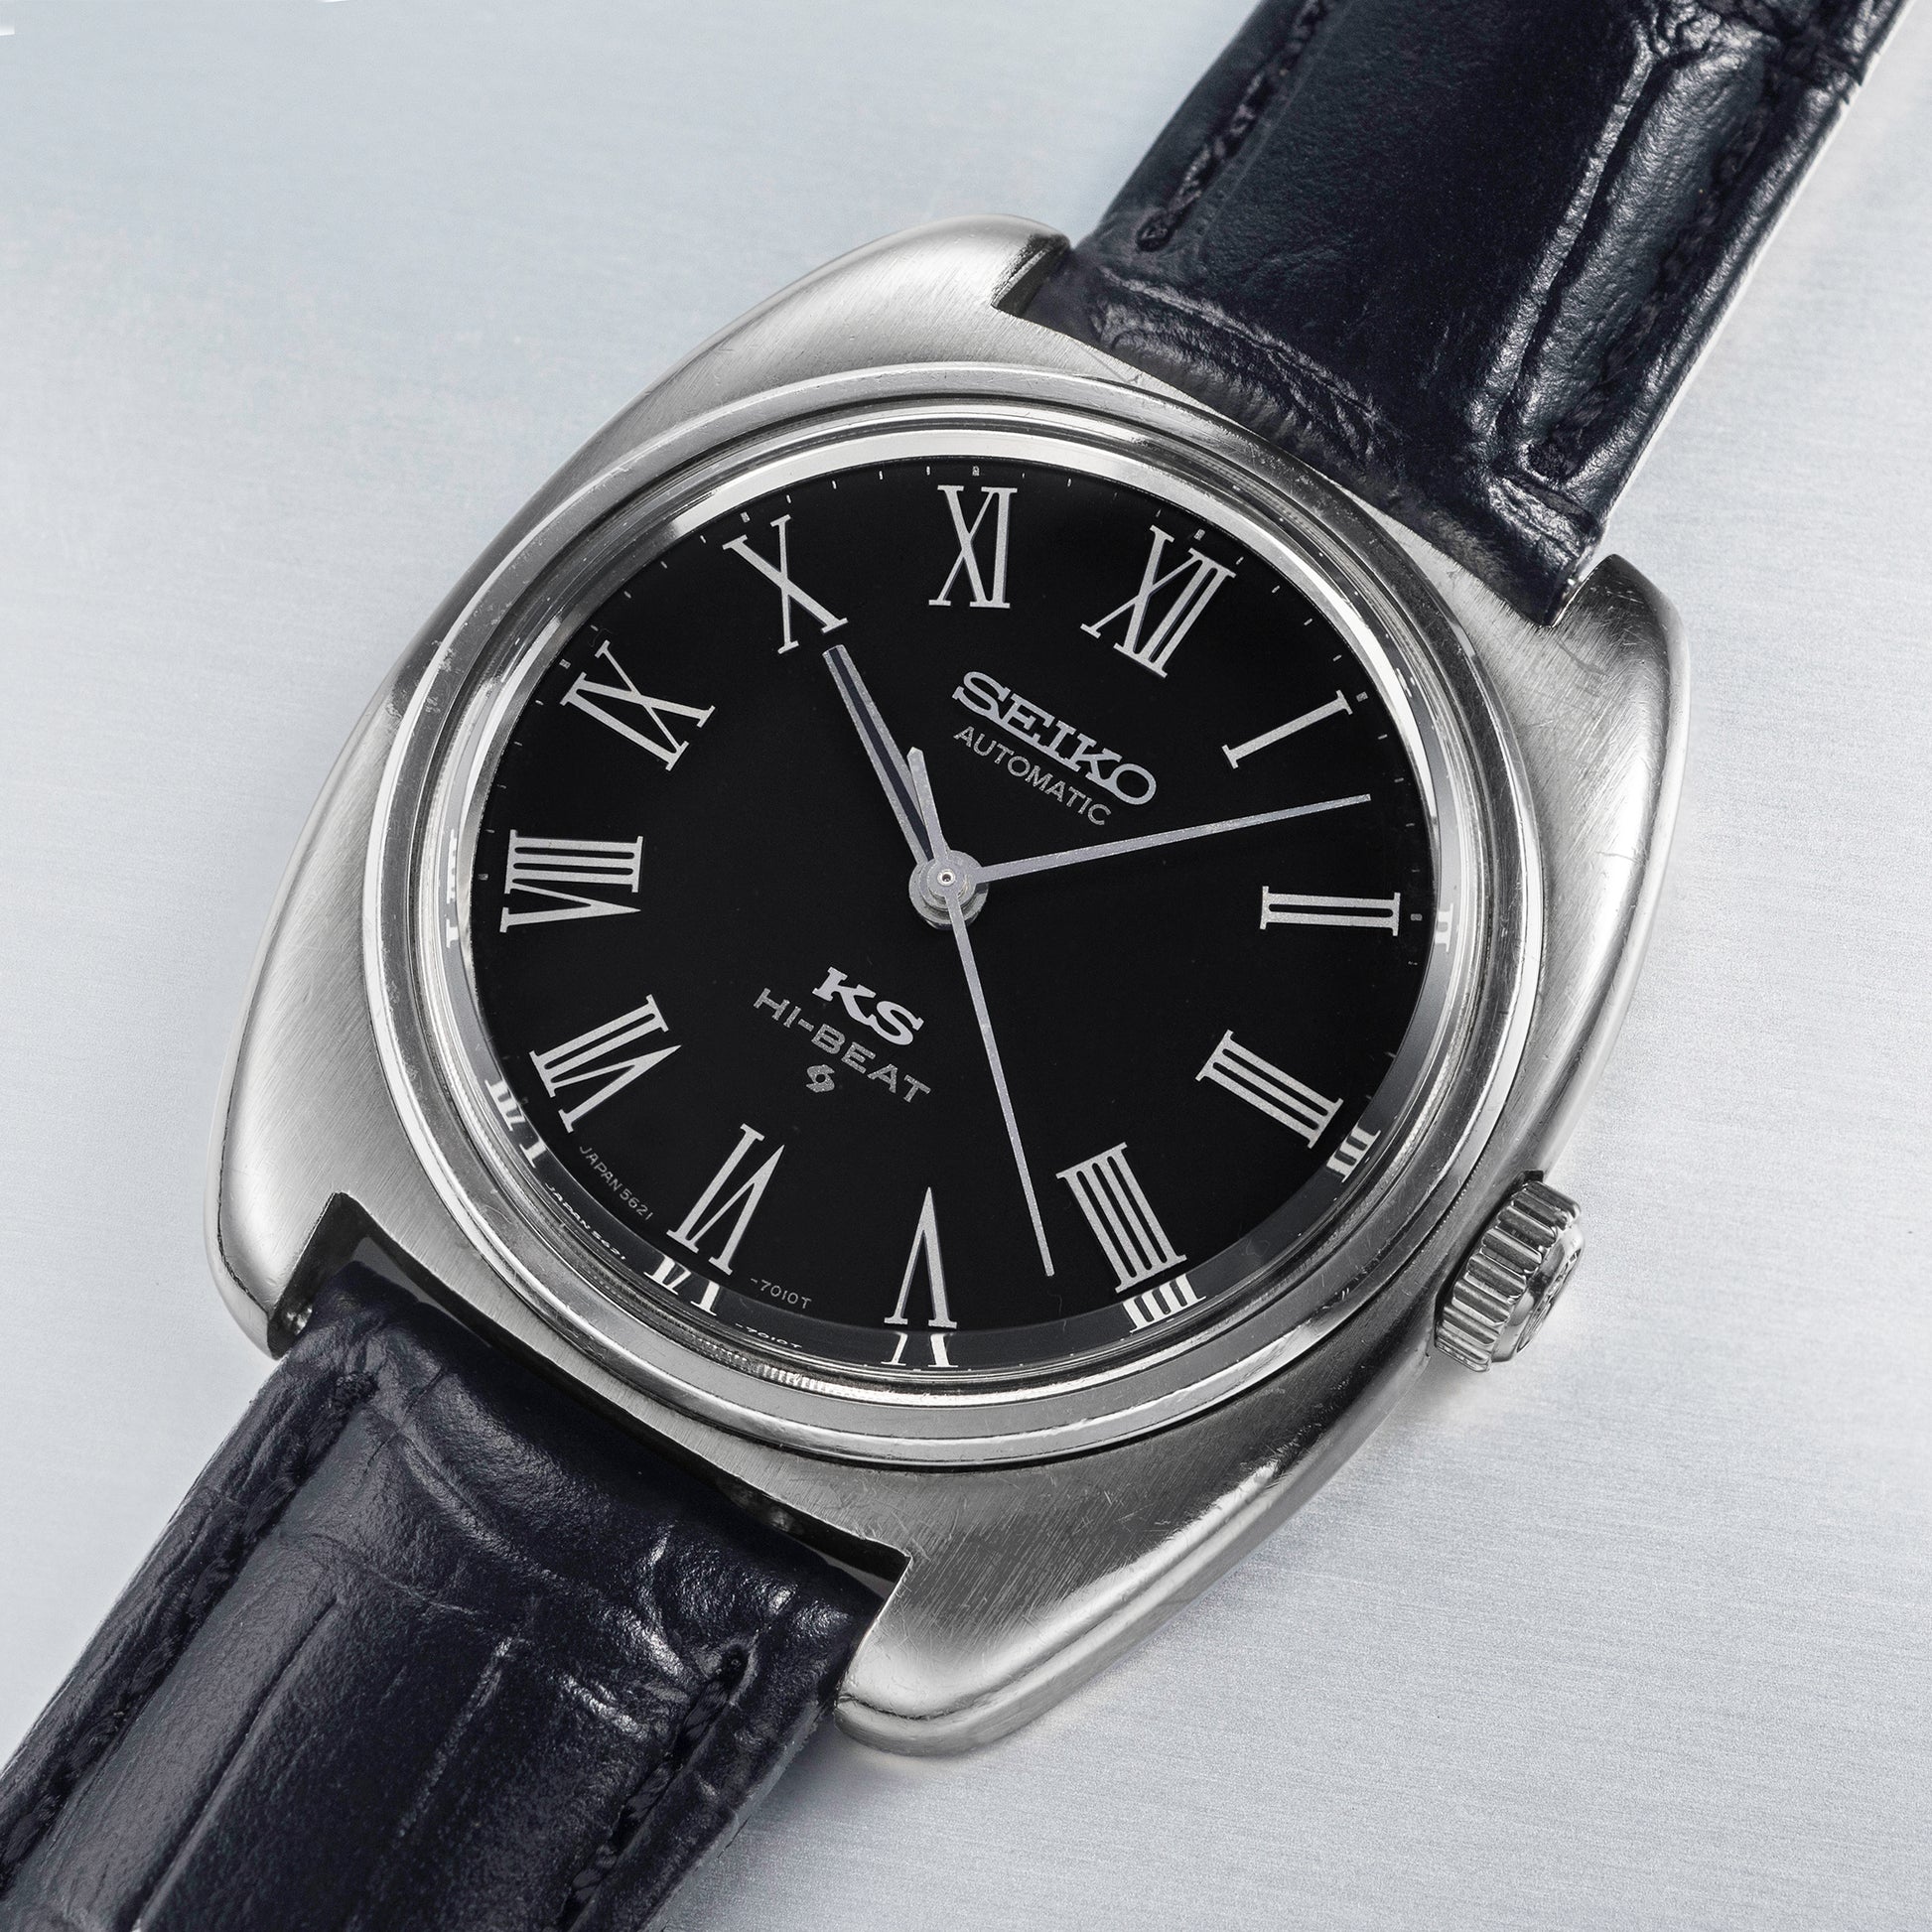 No. 669 / King Seiko KS56 - 1972 – From Time To Times